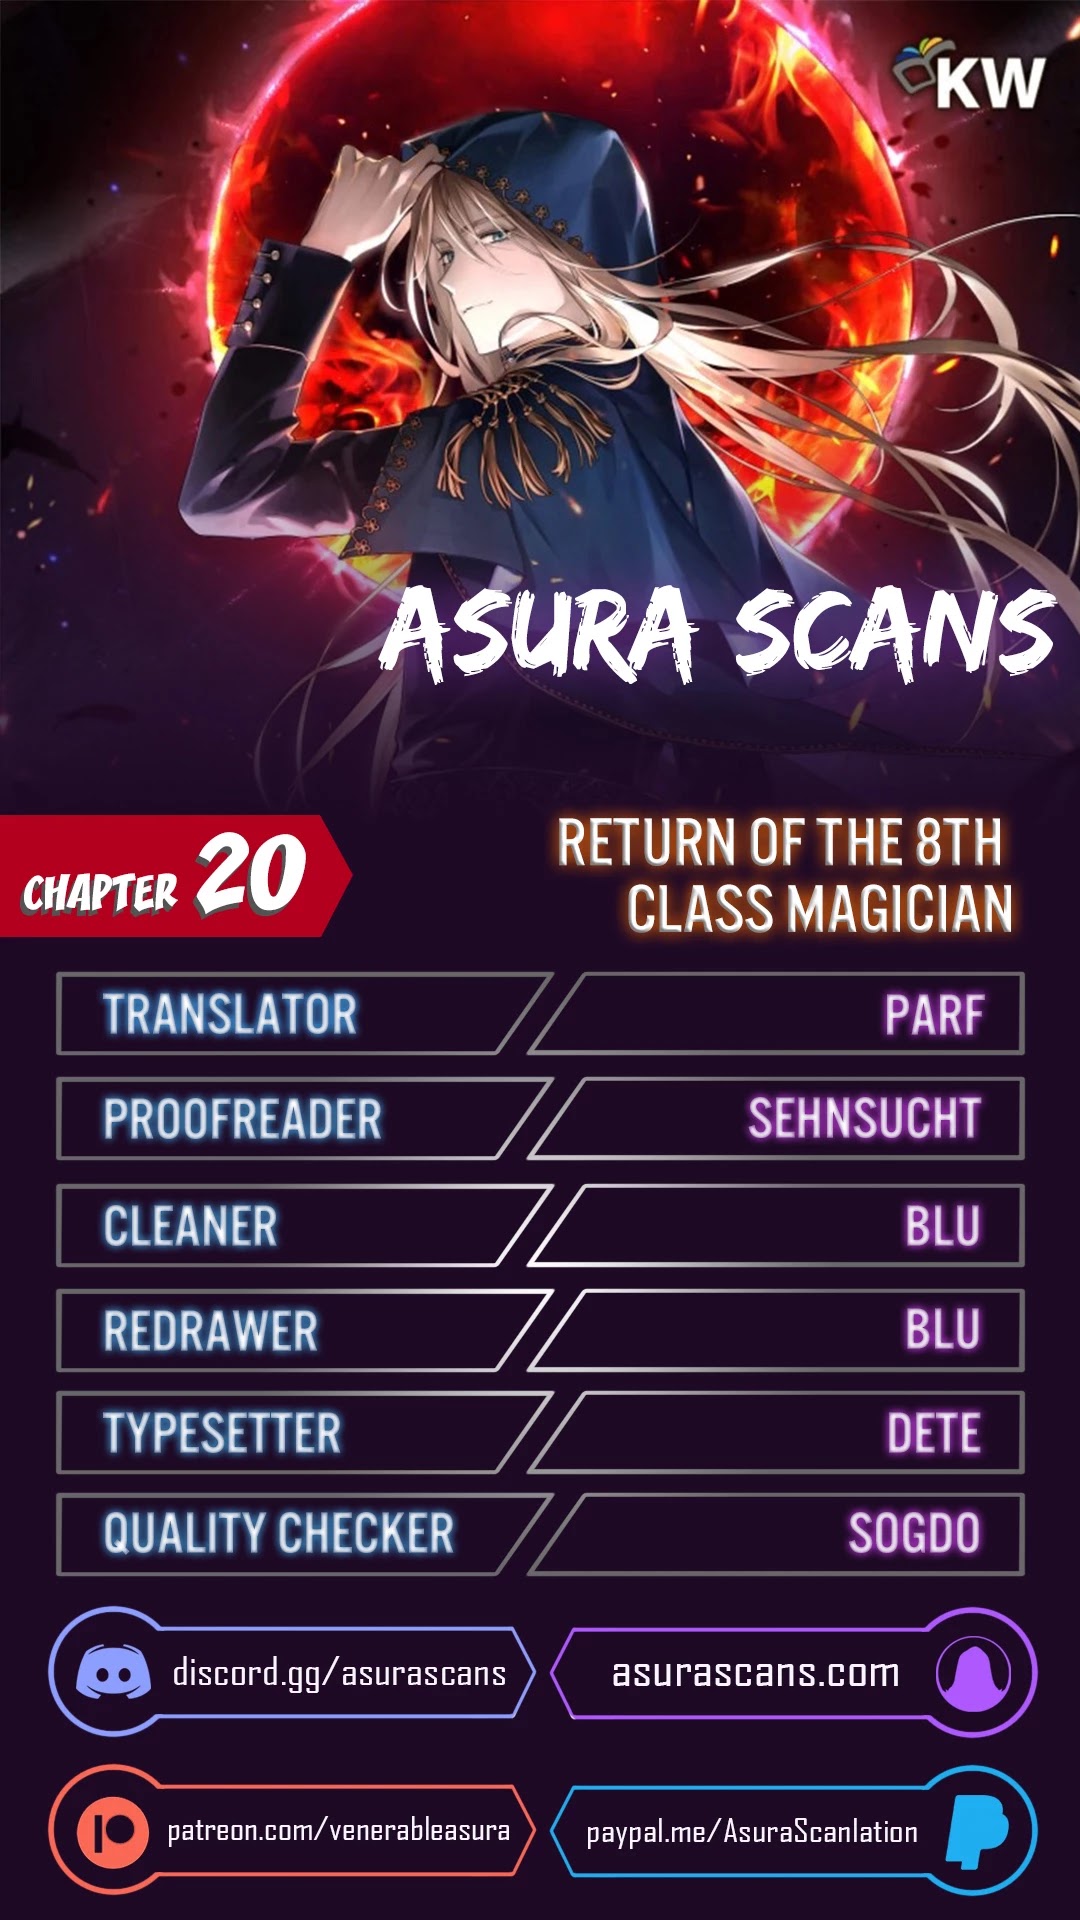 Return of the 8th class Magician chapter 20